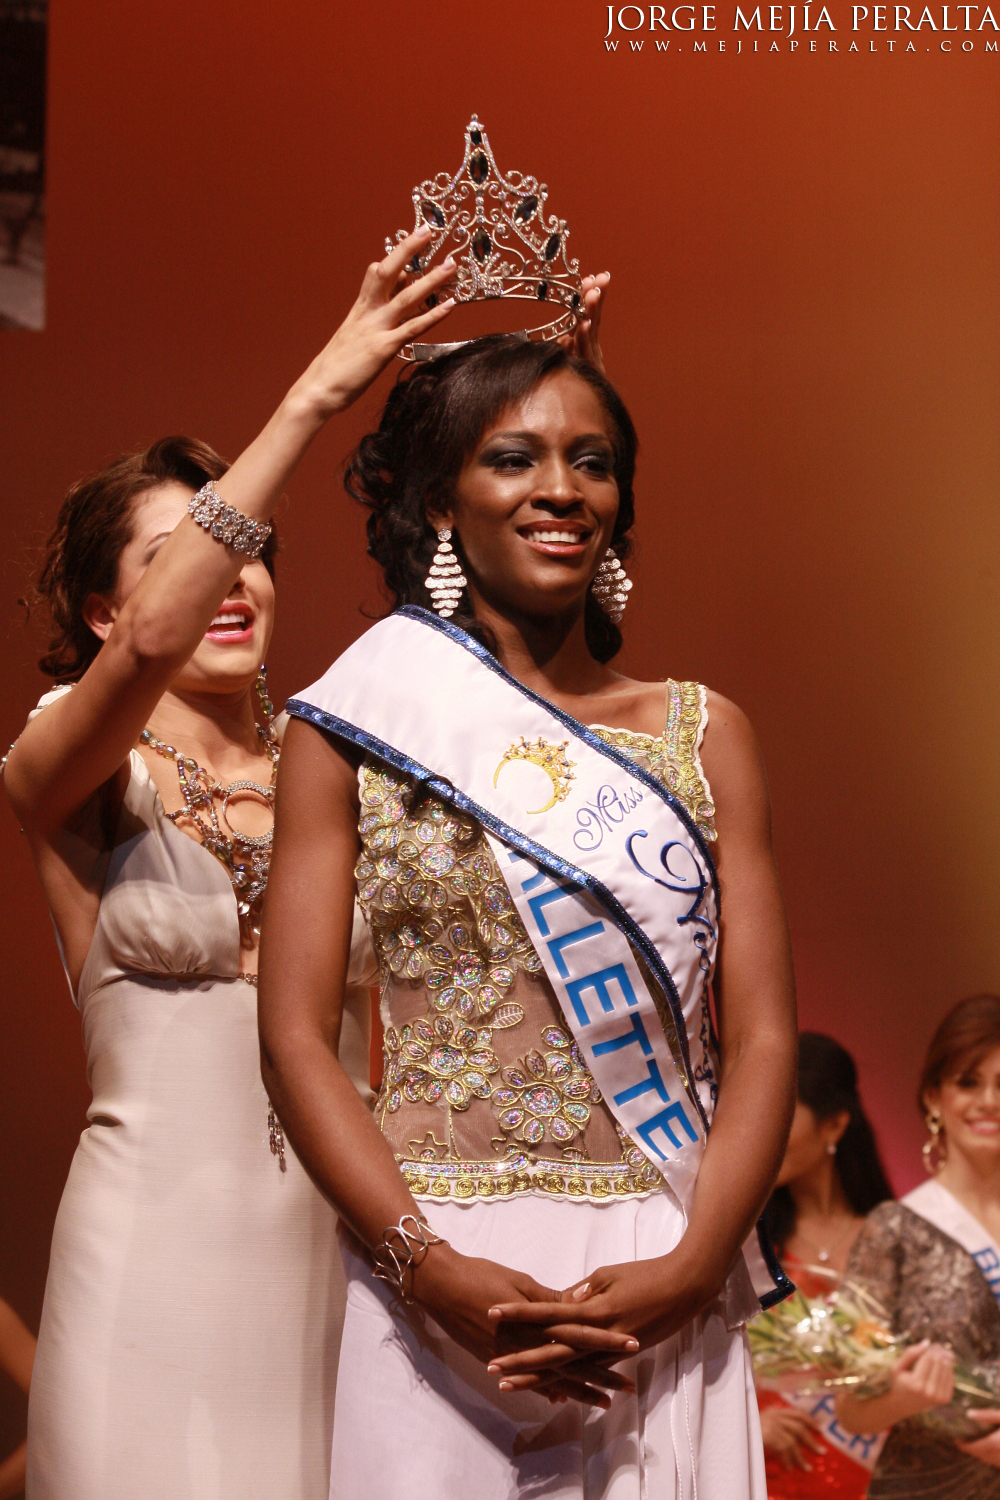 two women on stage with one placing a crown on the other